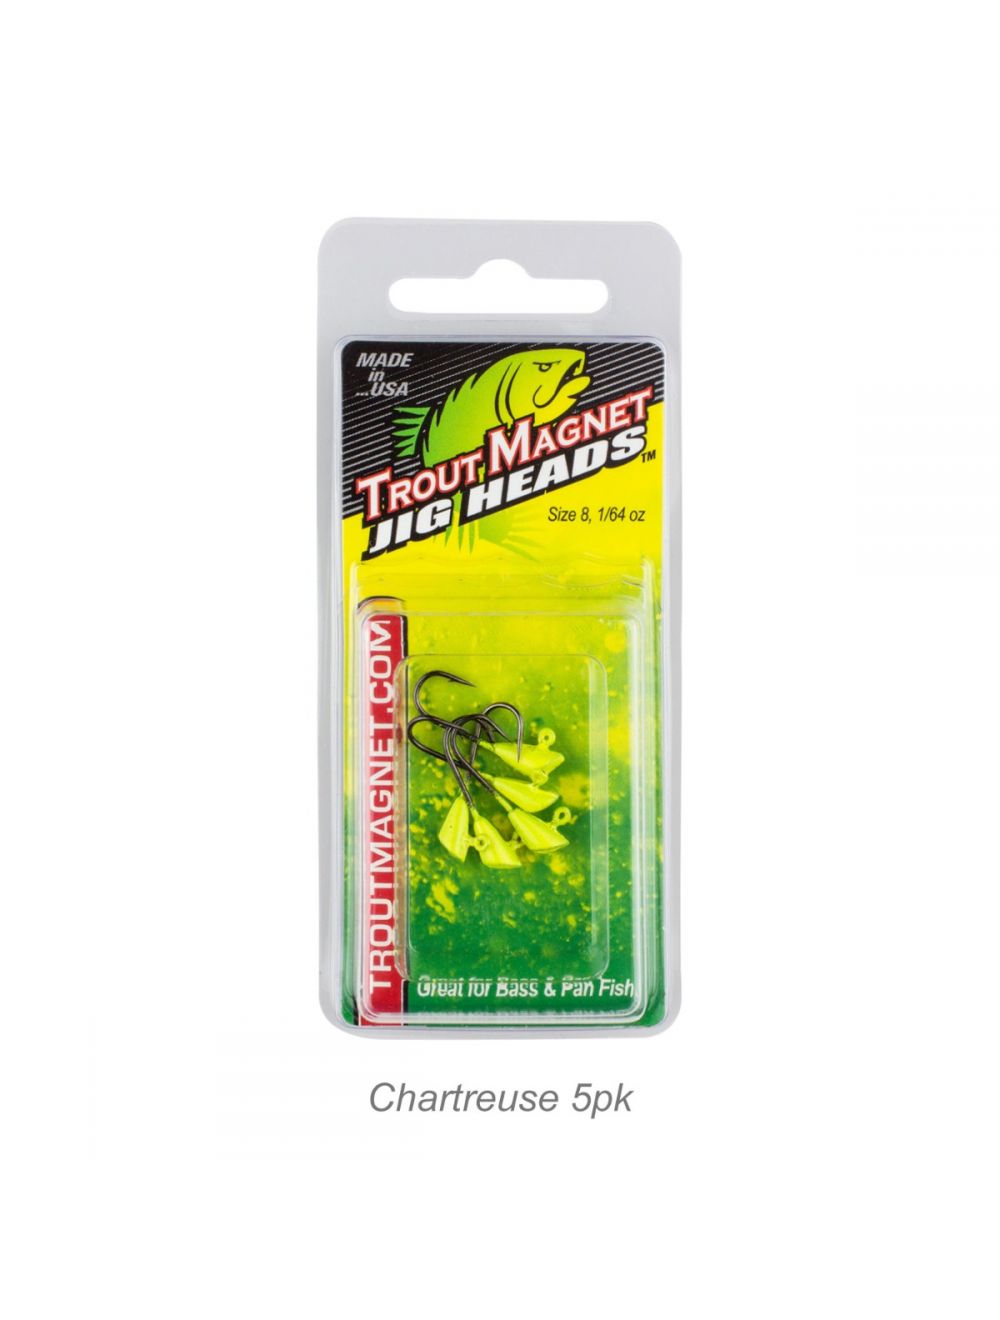 Leland Lures Trout Magnet Jig Heads - Chartreuse / 1/64 oz